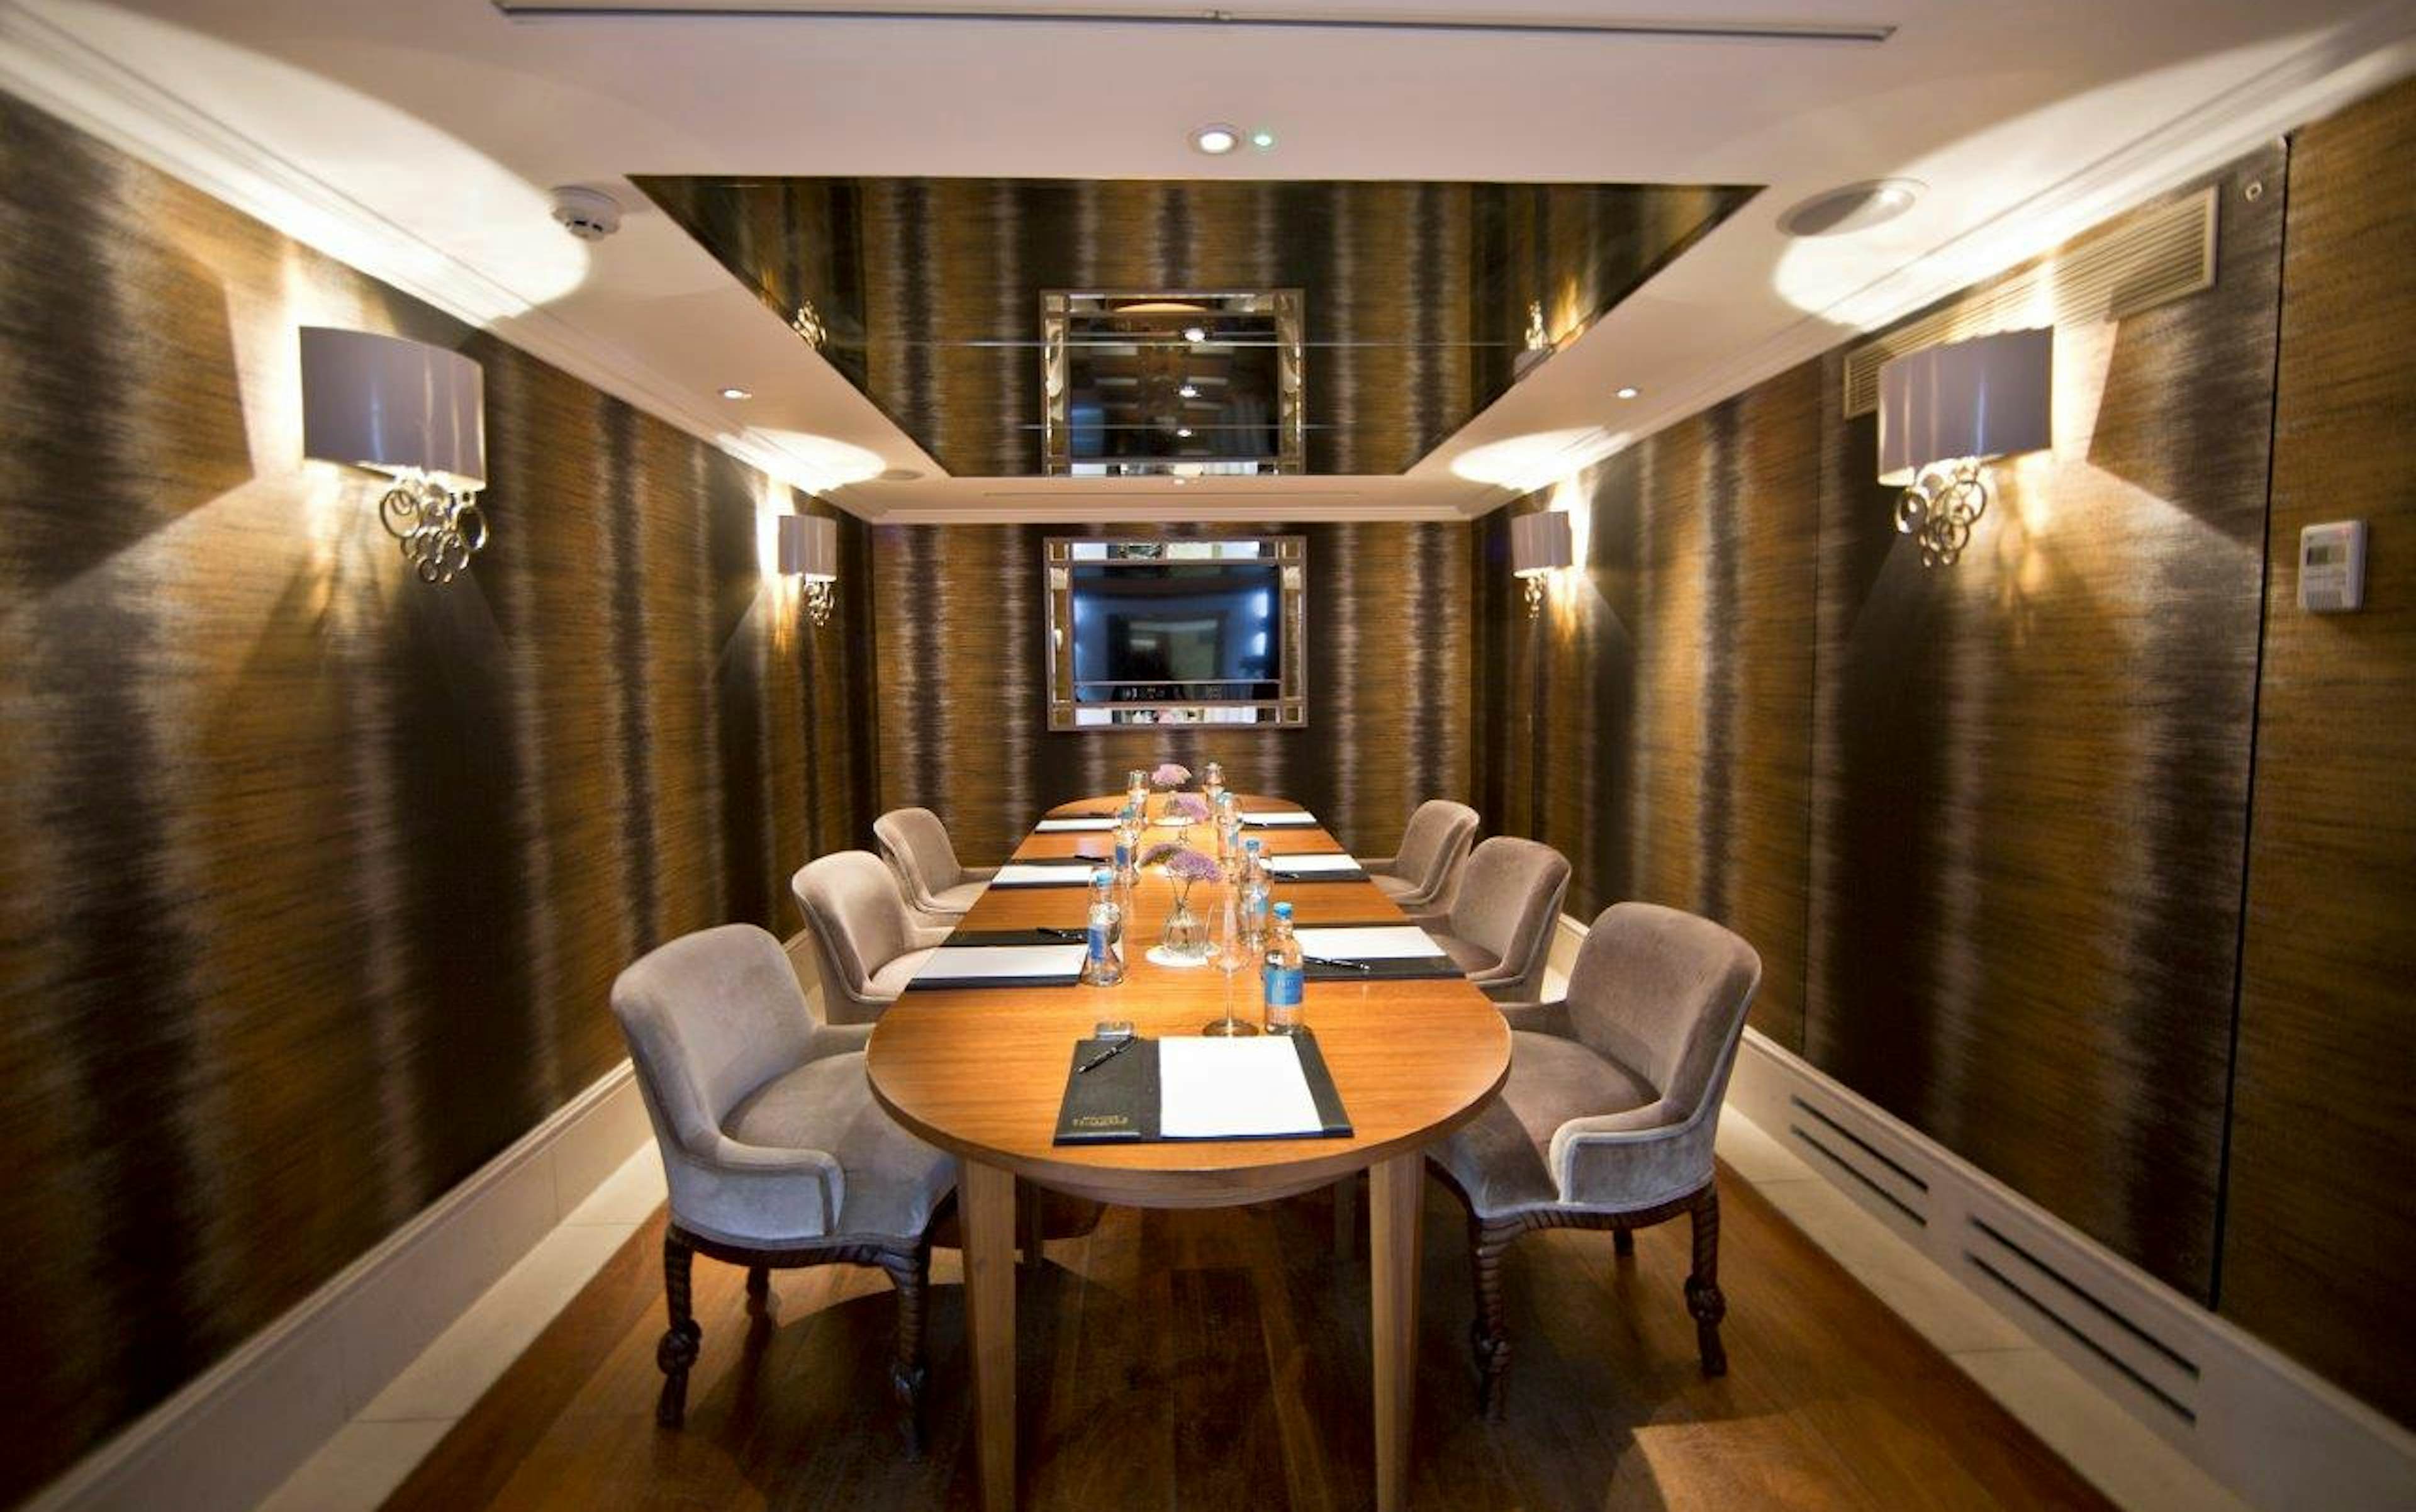 St. James's Hotel and Club - Wellington Boardroom image 1